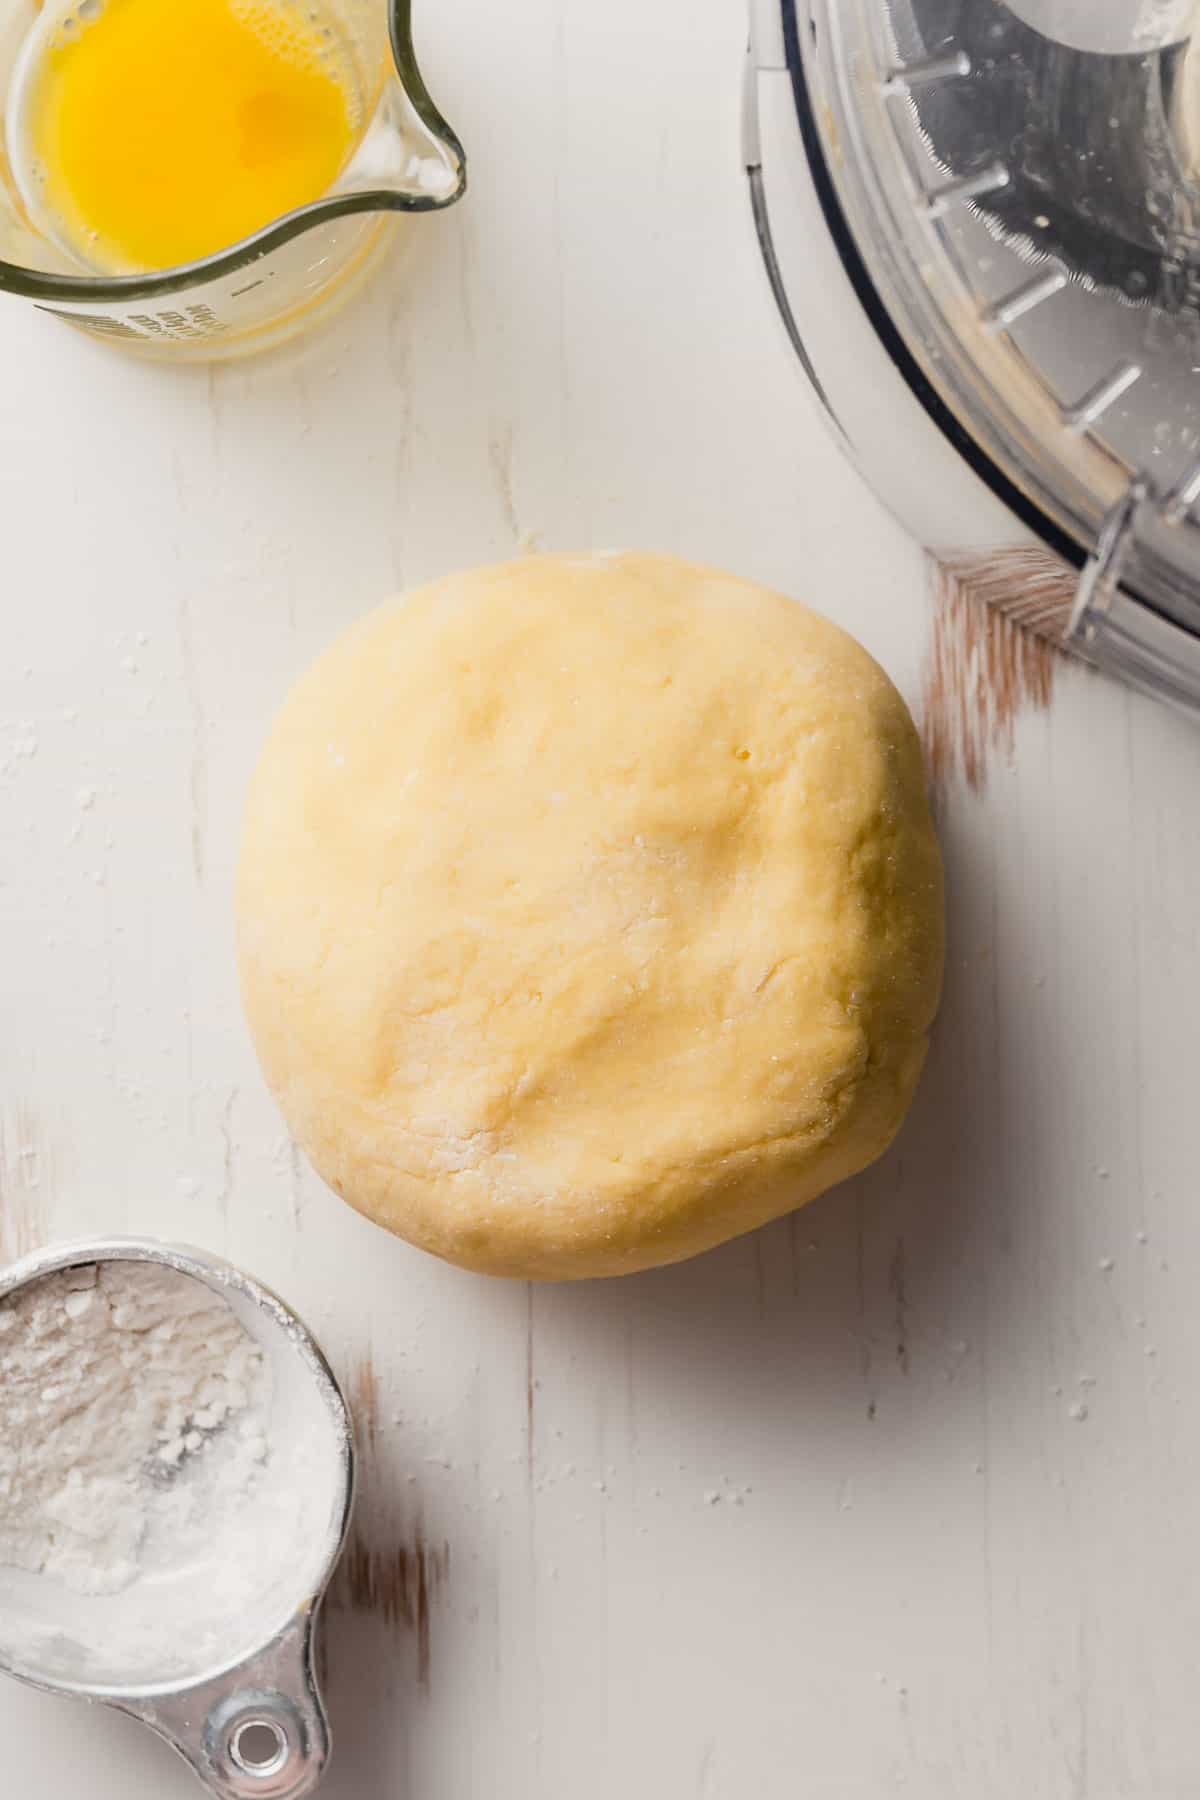 A perfect ball of pasta dough that is firm and smooth.